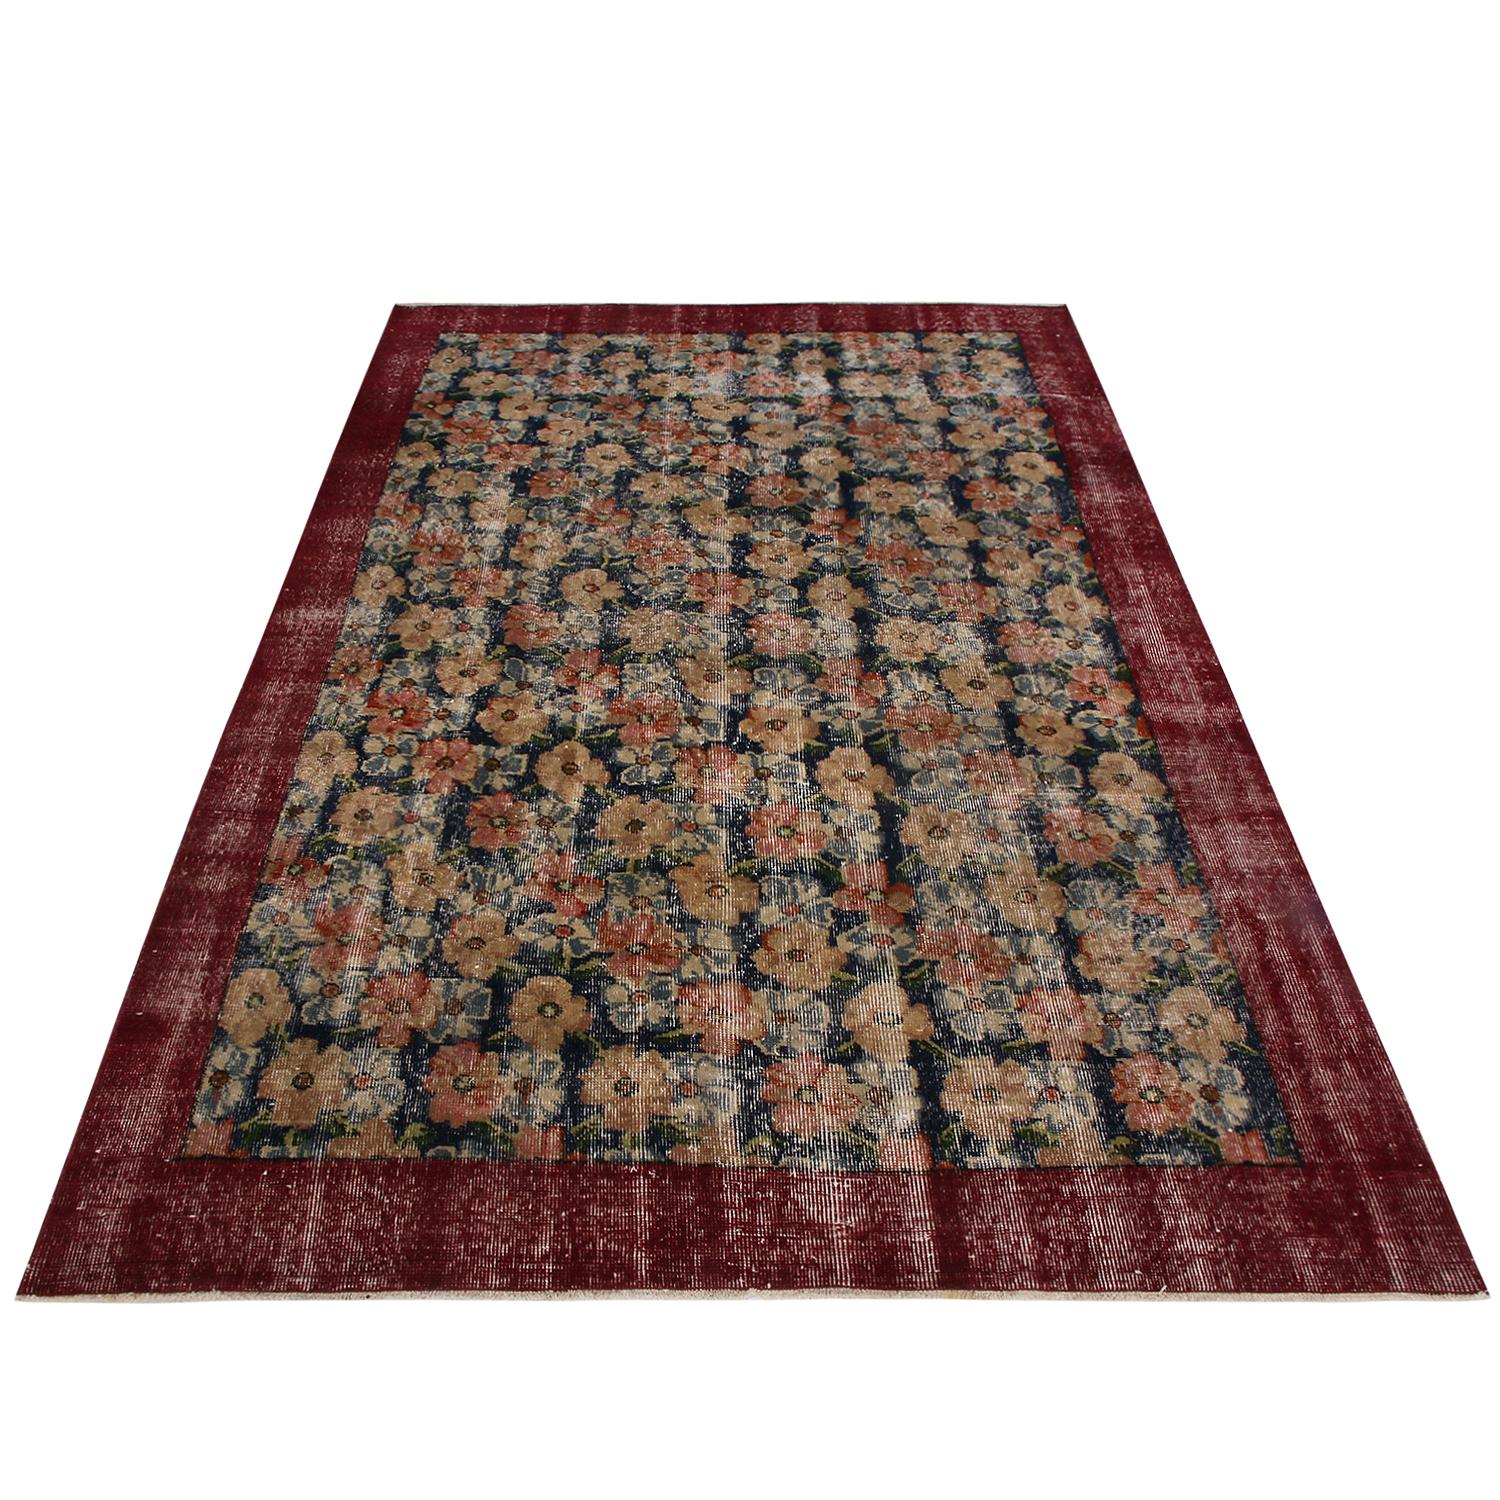 Hand knotted in Turkey originating between 1960-1970, this vintage midcentury runner joins our midcentury Pasha collection celebrating Turkish icon Zeki Müren with Josh’s hand picked favorites from this period. It’s rare in this line to see a